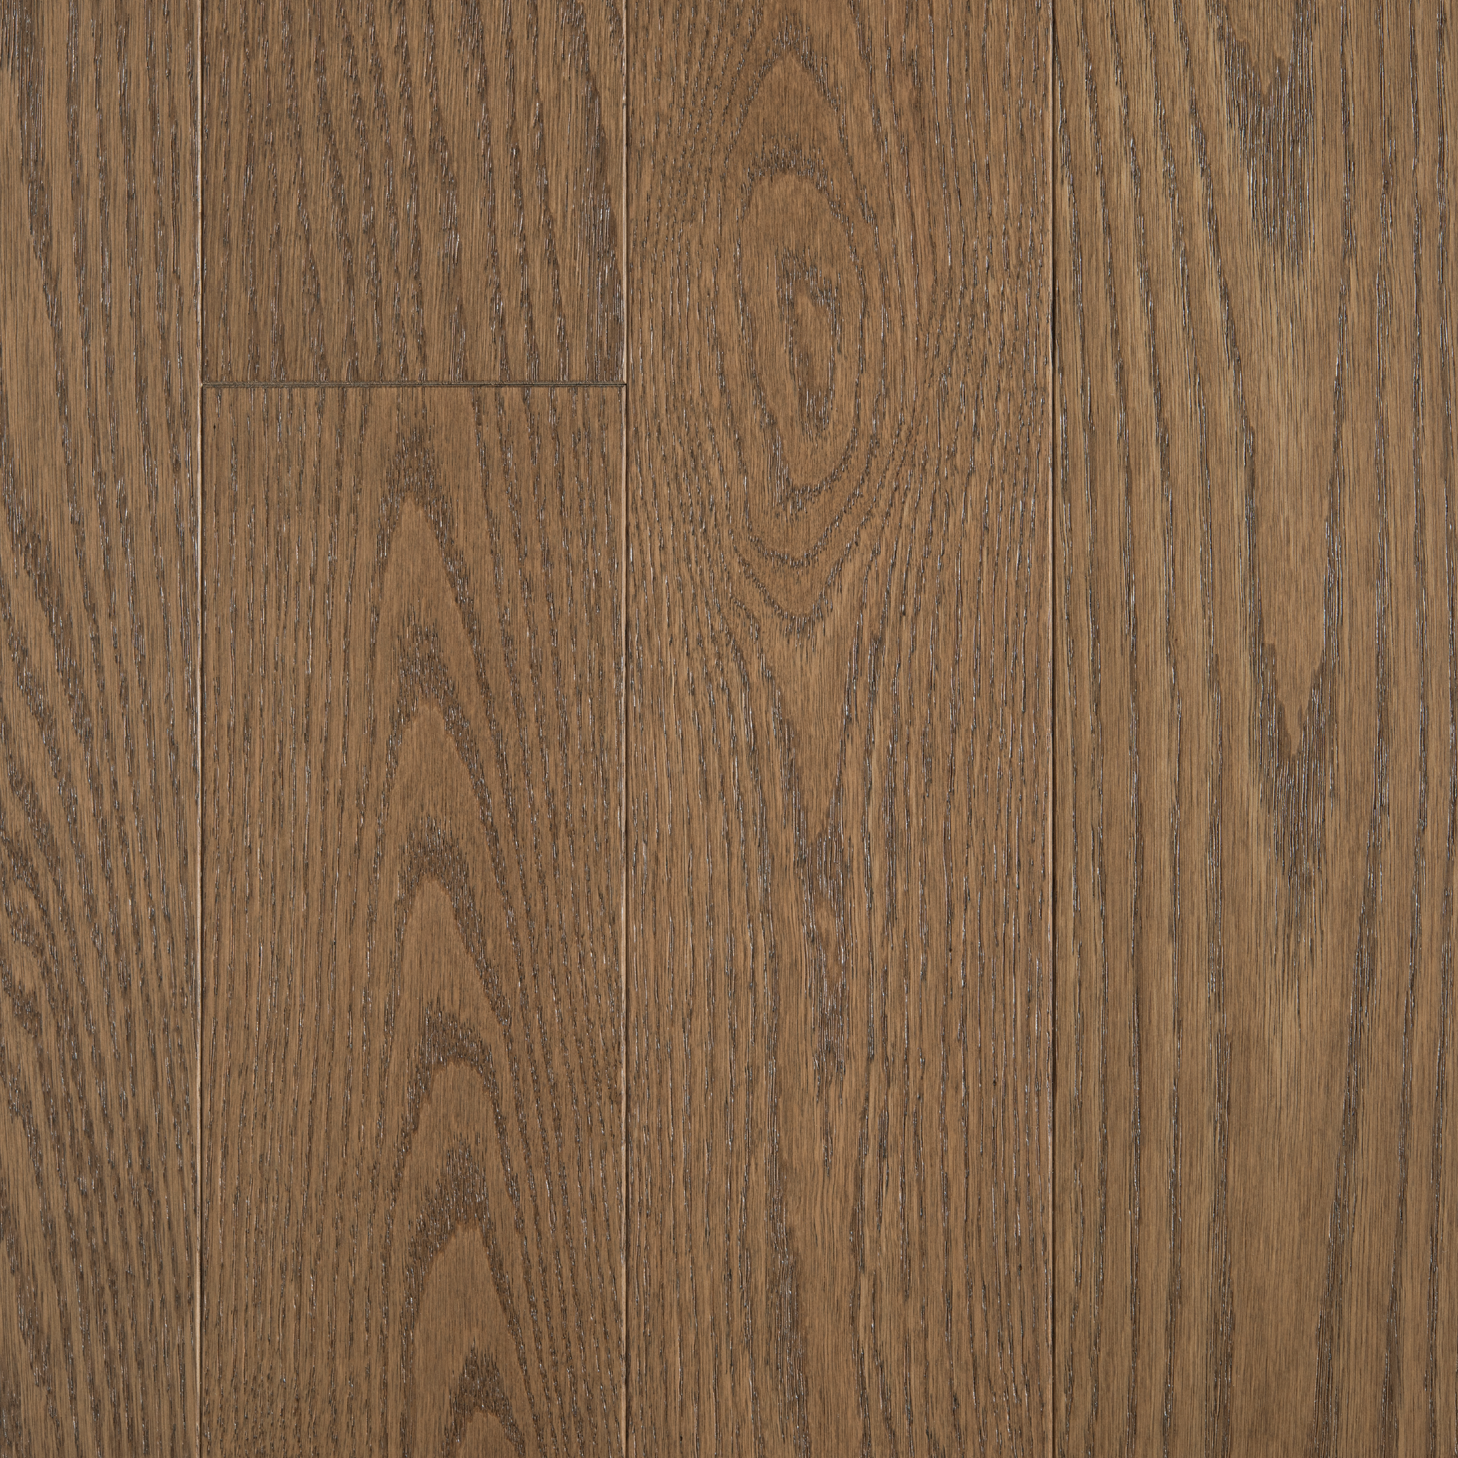 Chêne Rouge Select / Red Oak Select - Bisque